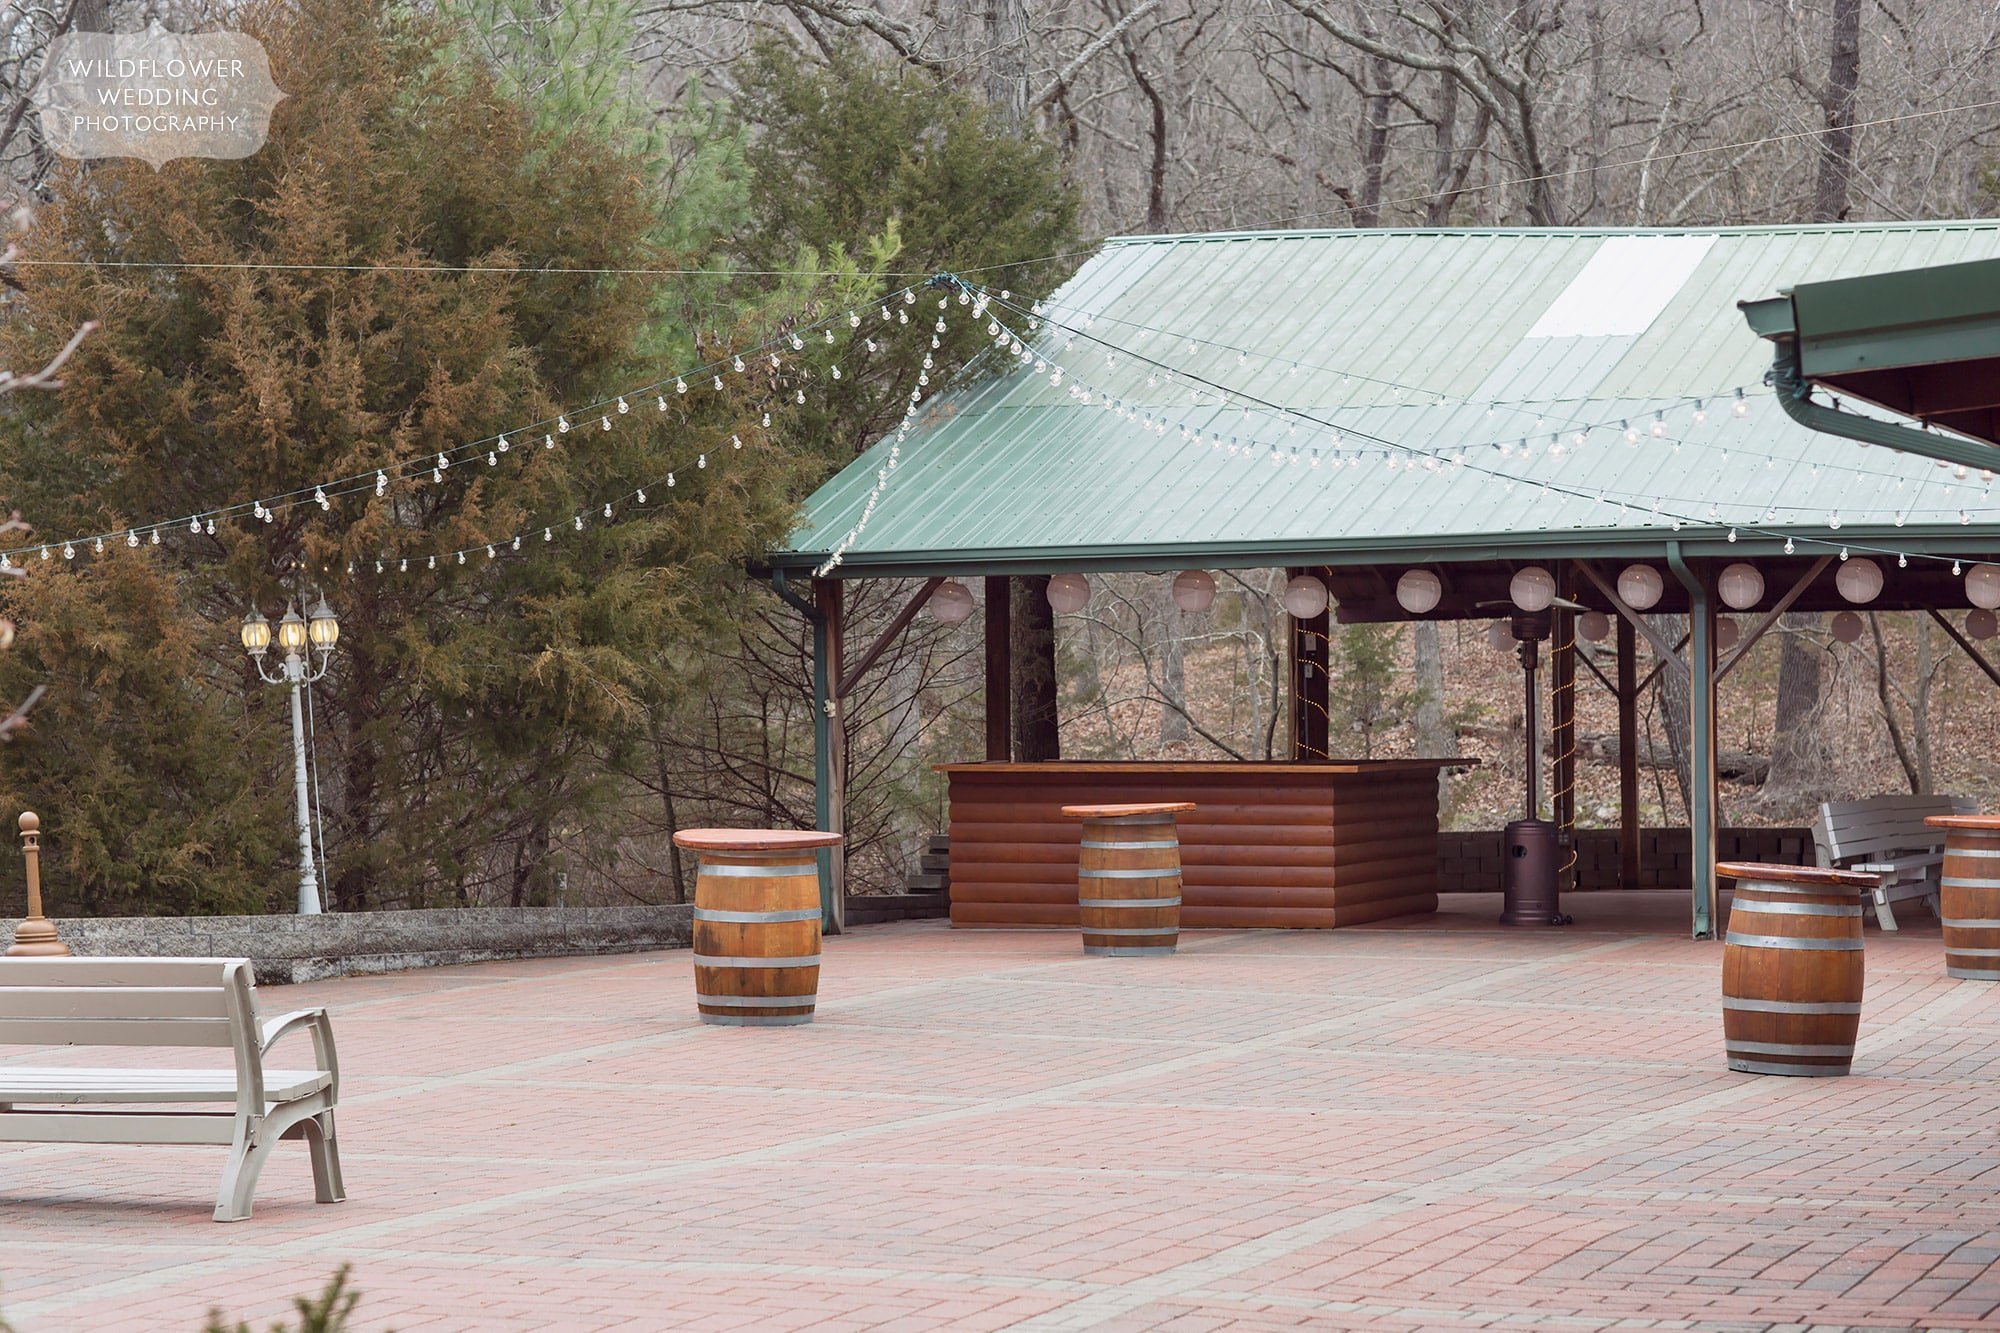 Little Piney Lodge has an outdoor wedding reception pavilion space with string cafe lights.